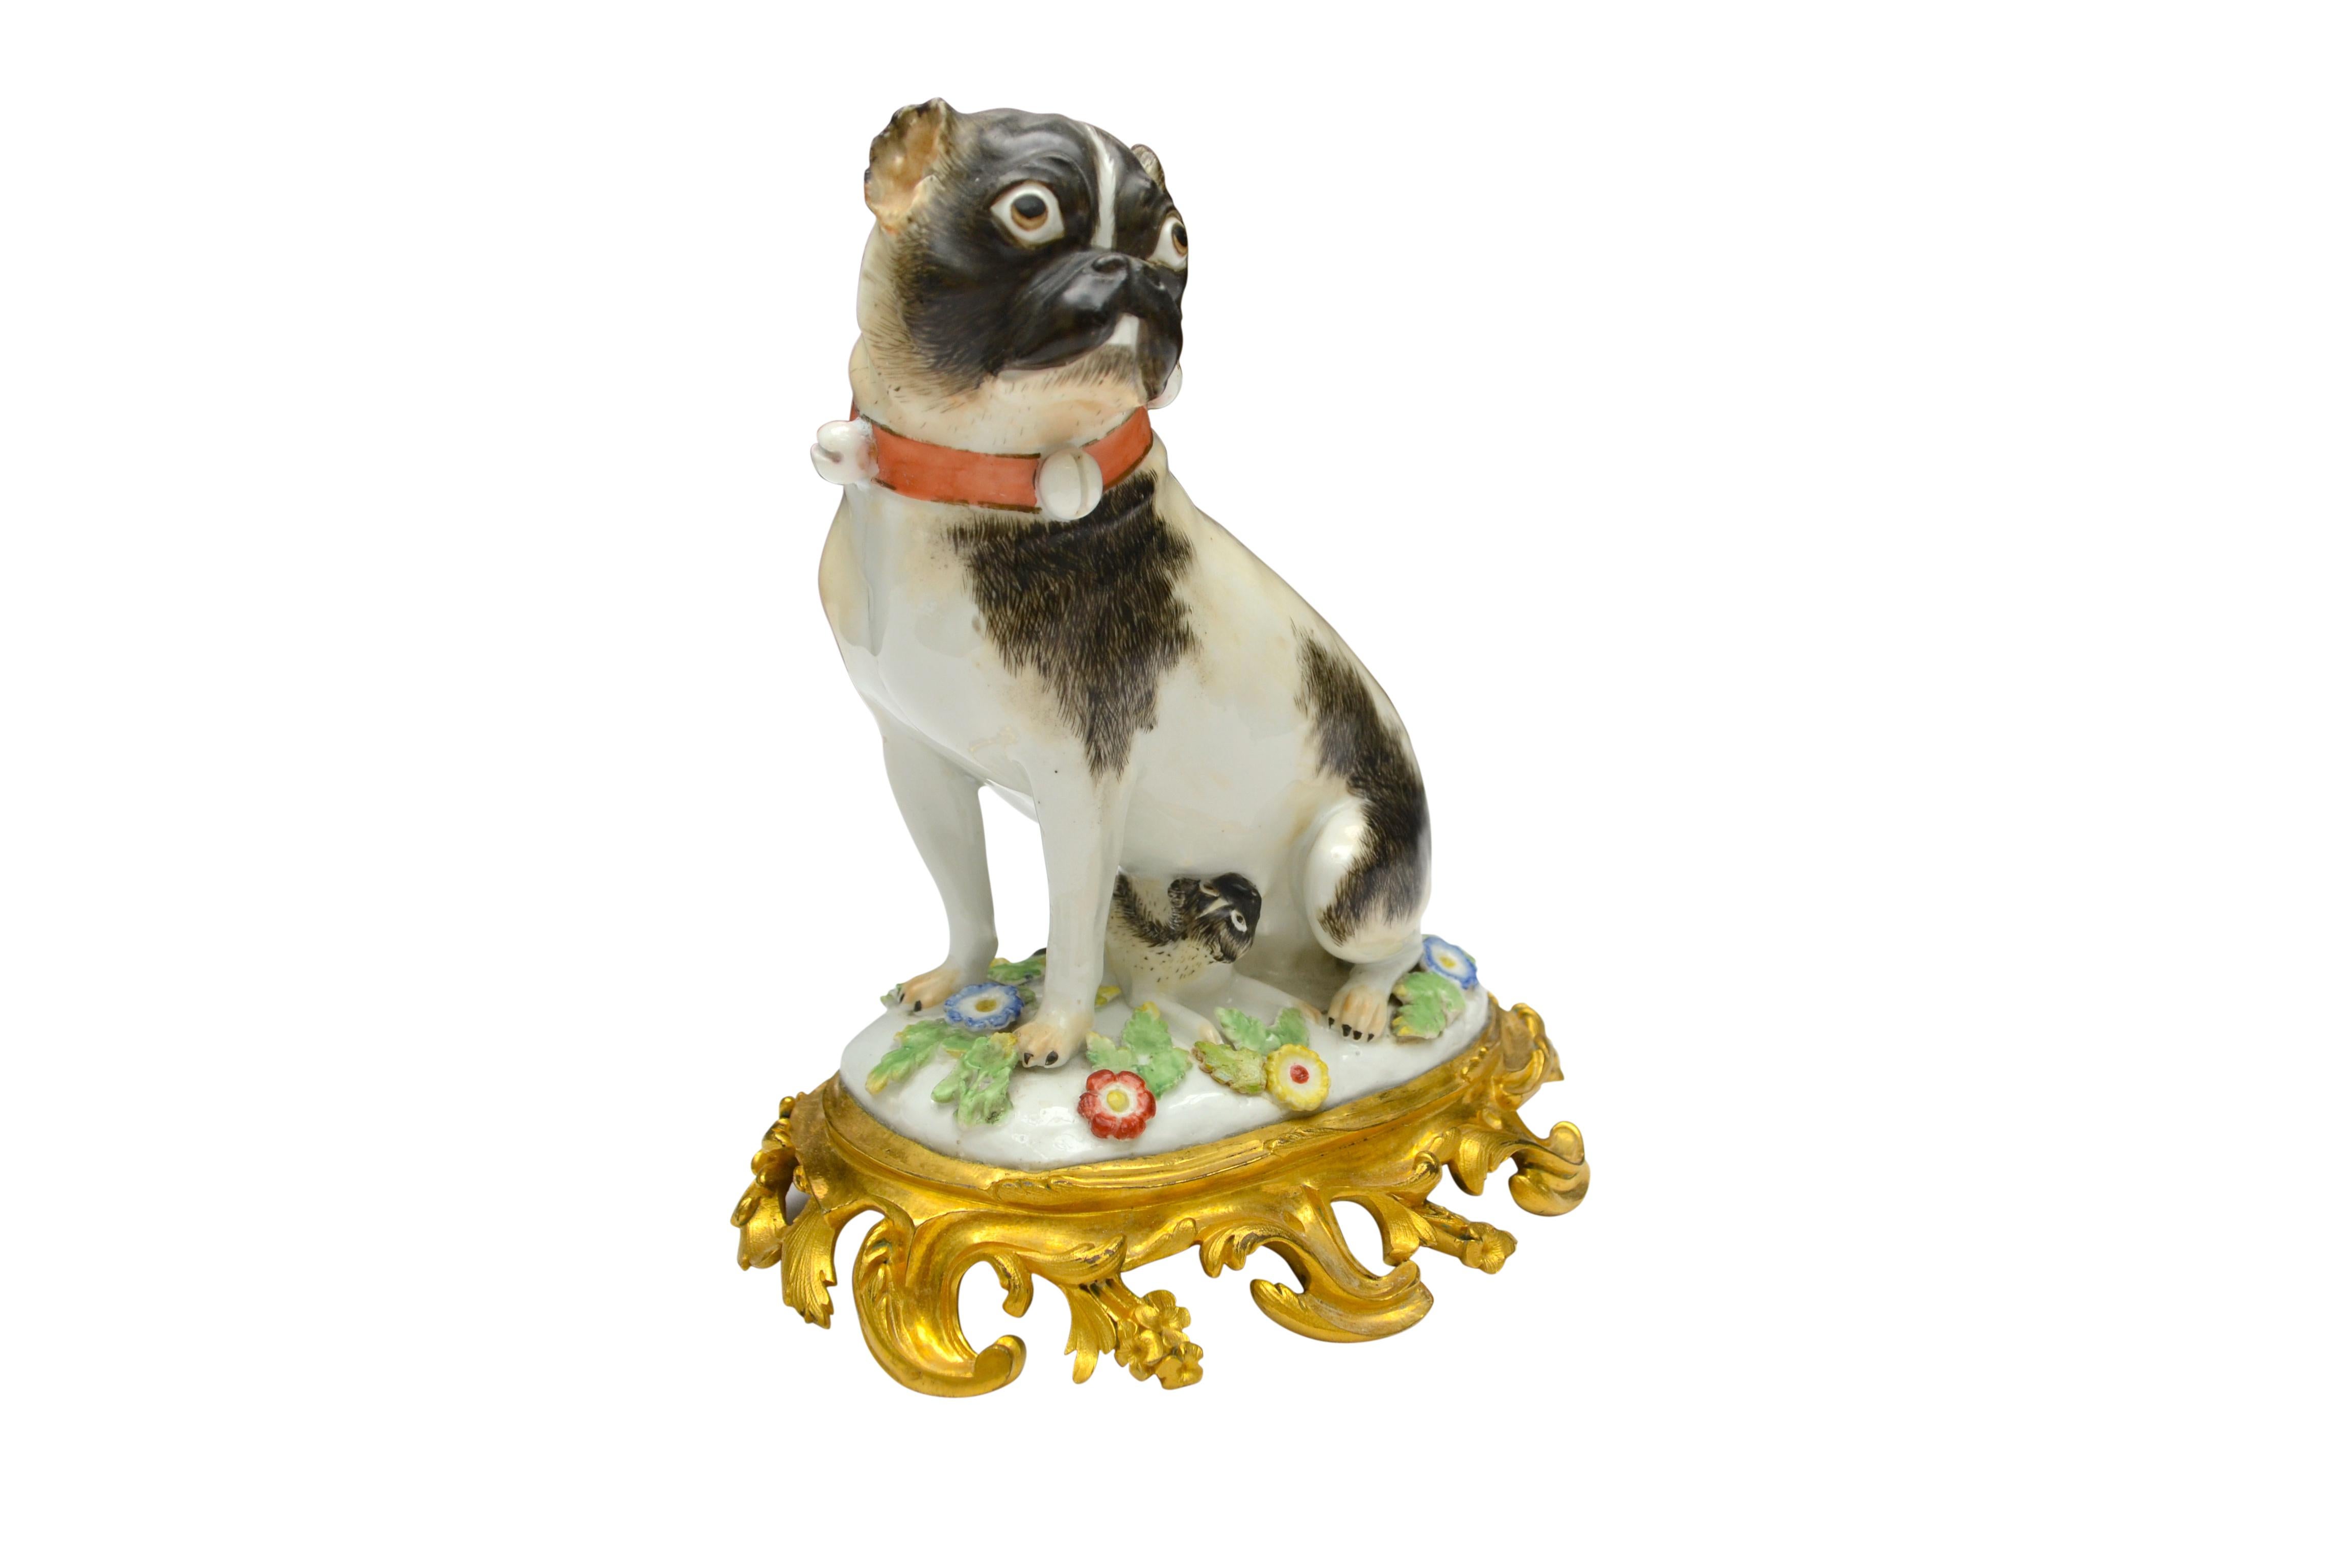 A fine Meissen pug dog after an 18th century model by Kaendler, on a gilt bronze rococo style base. This porcelain is likely one part of a set of two pugs, the female and the male. The porcelain has a blue underglaze Meissen mark on the